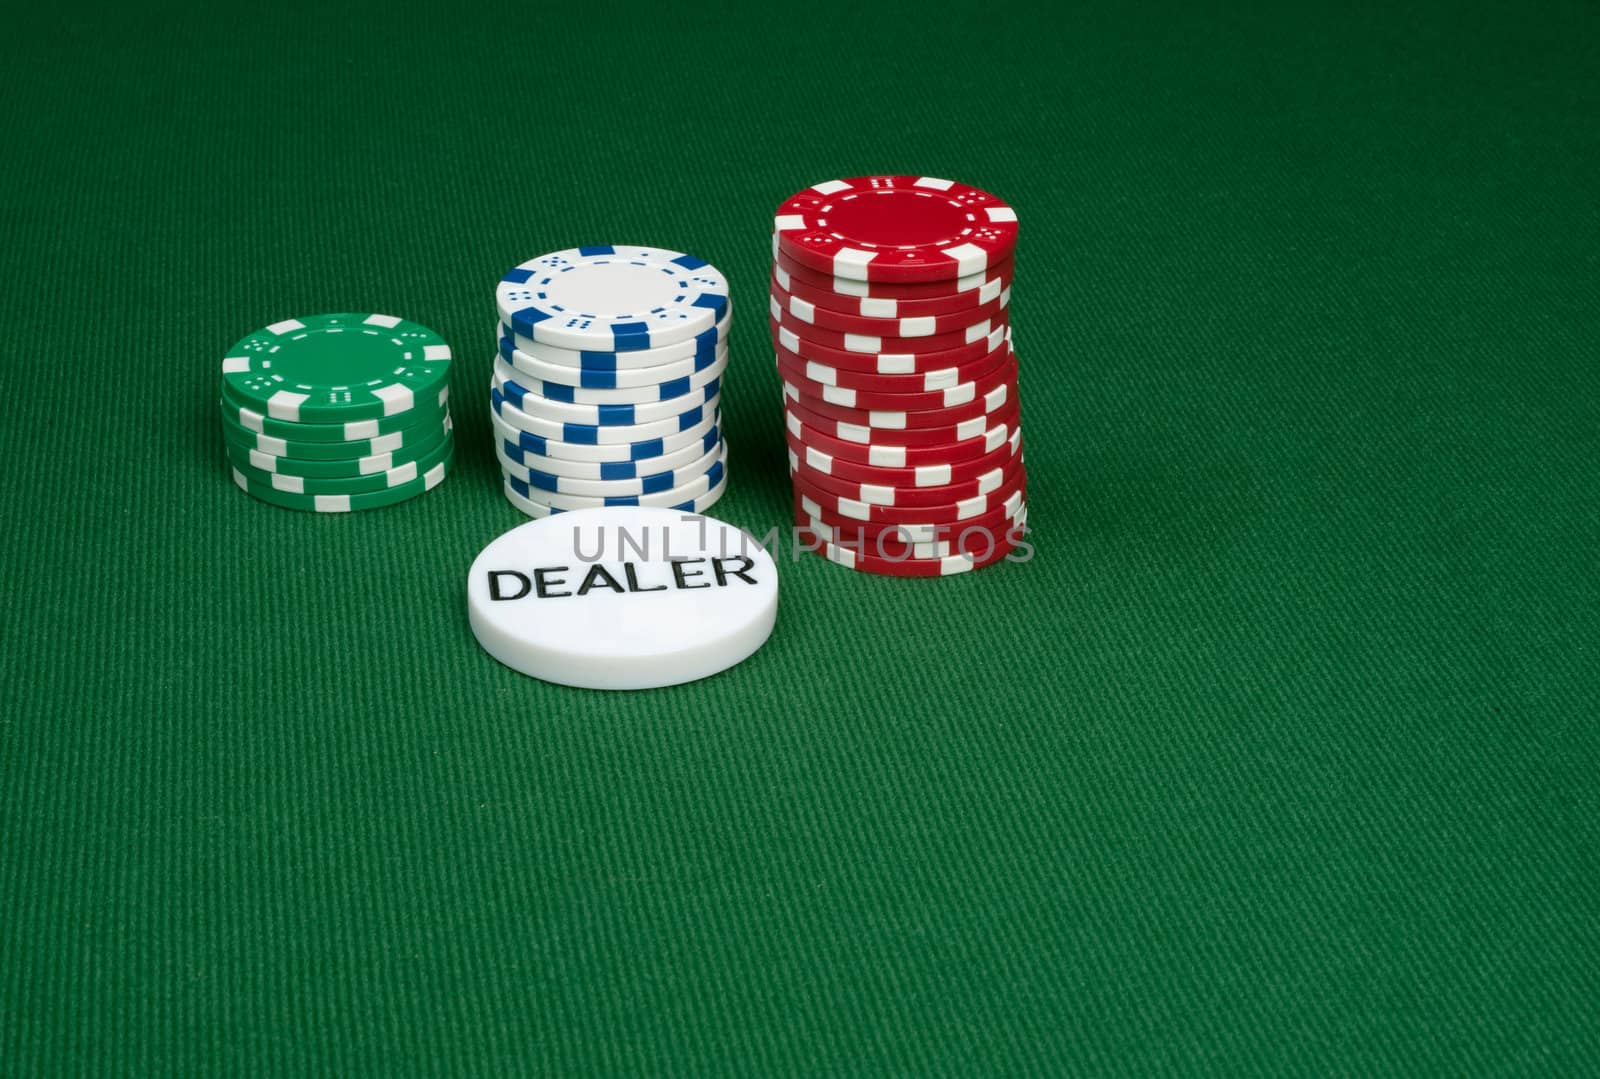 Three stacks of poker chips on a green felt table